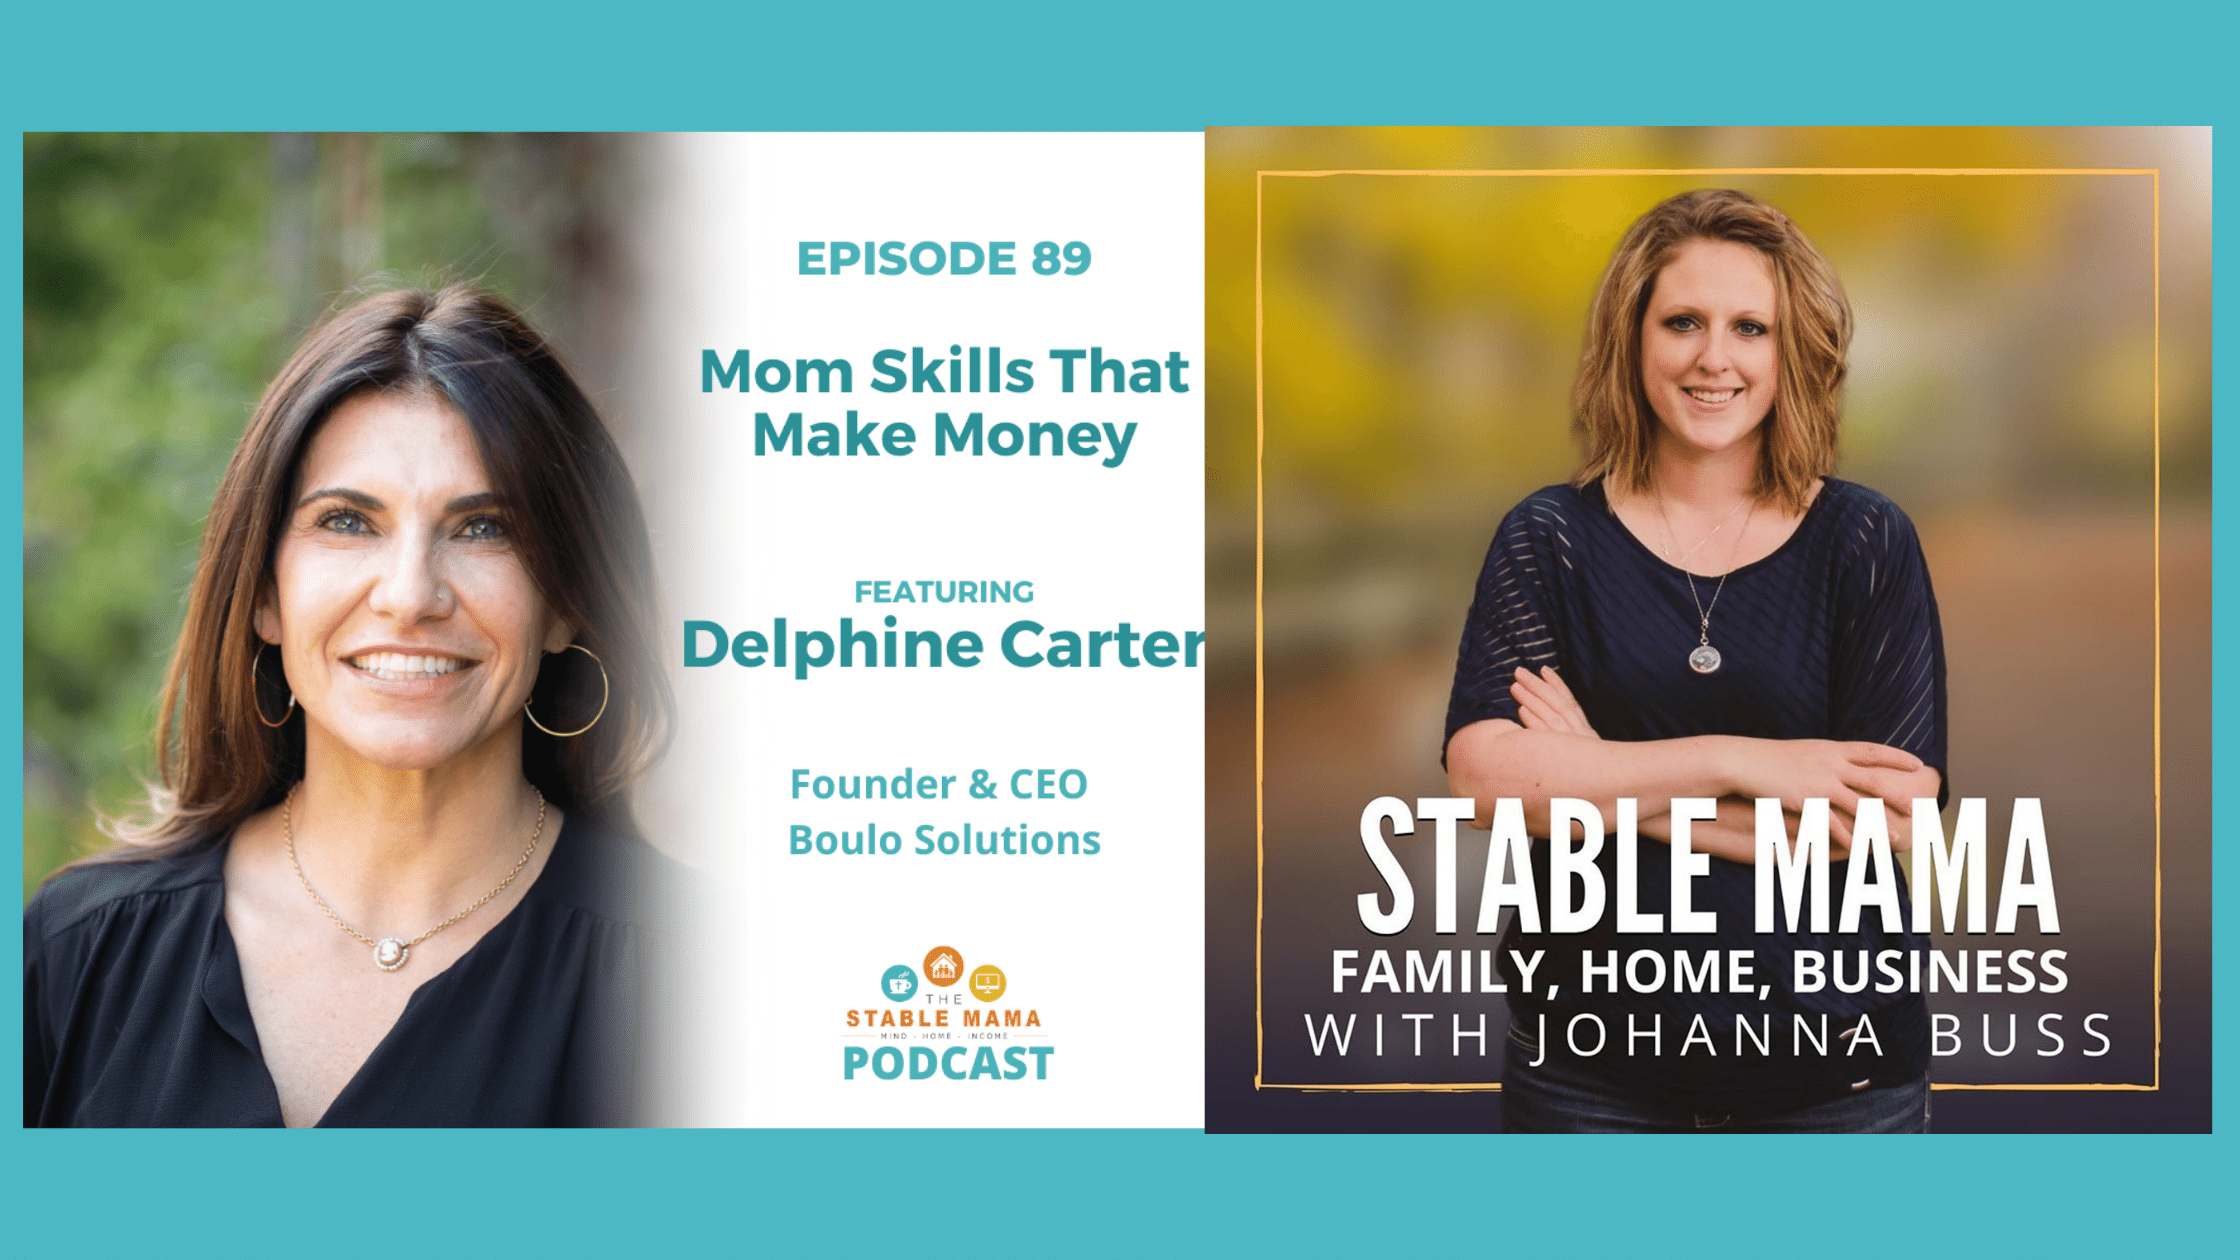 Mom Skills that make money text for podcast on Stable Mama with photos of Boulo's Delphine Carter and Johanna Buss